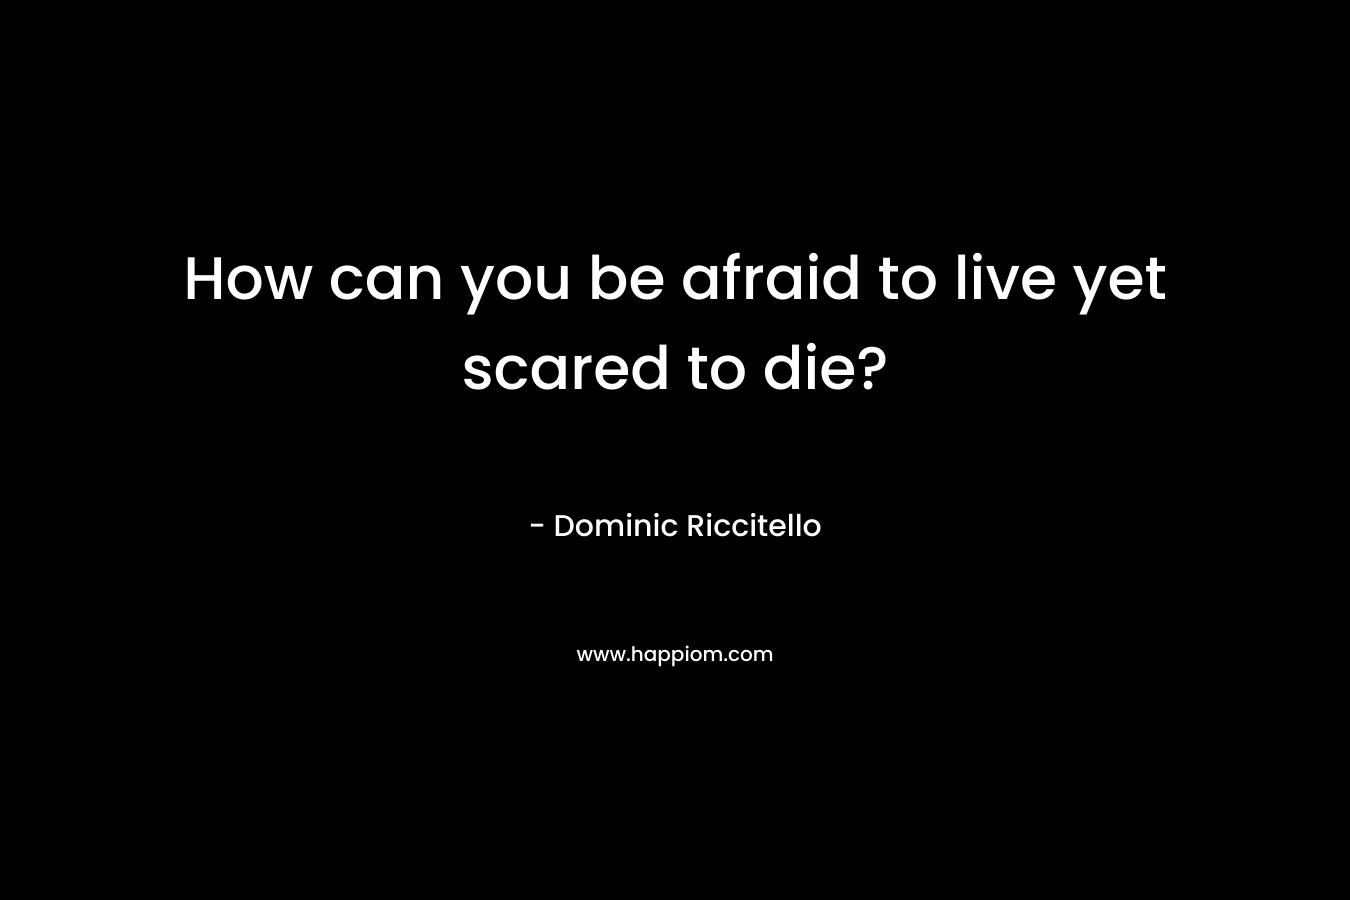 How can you be afraid to live yet scared to die?